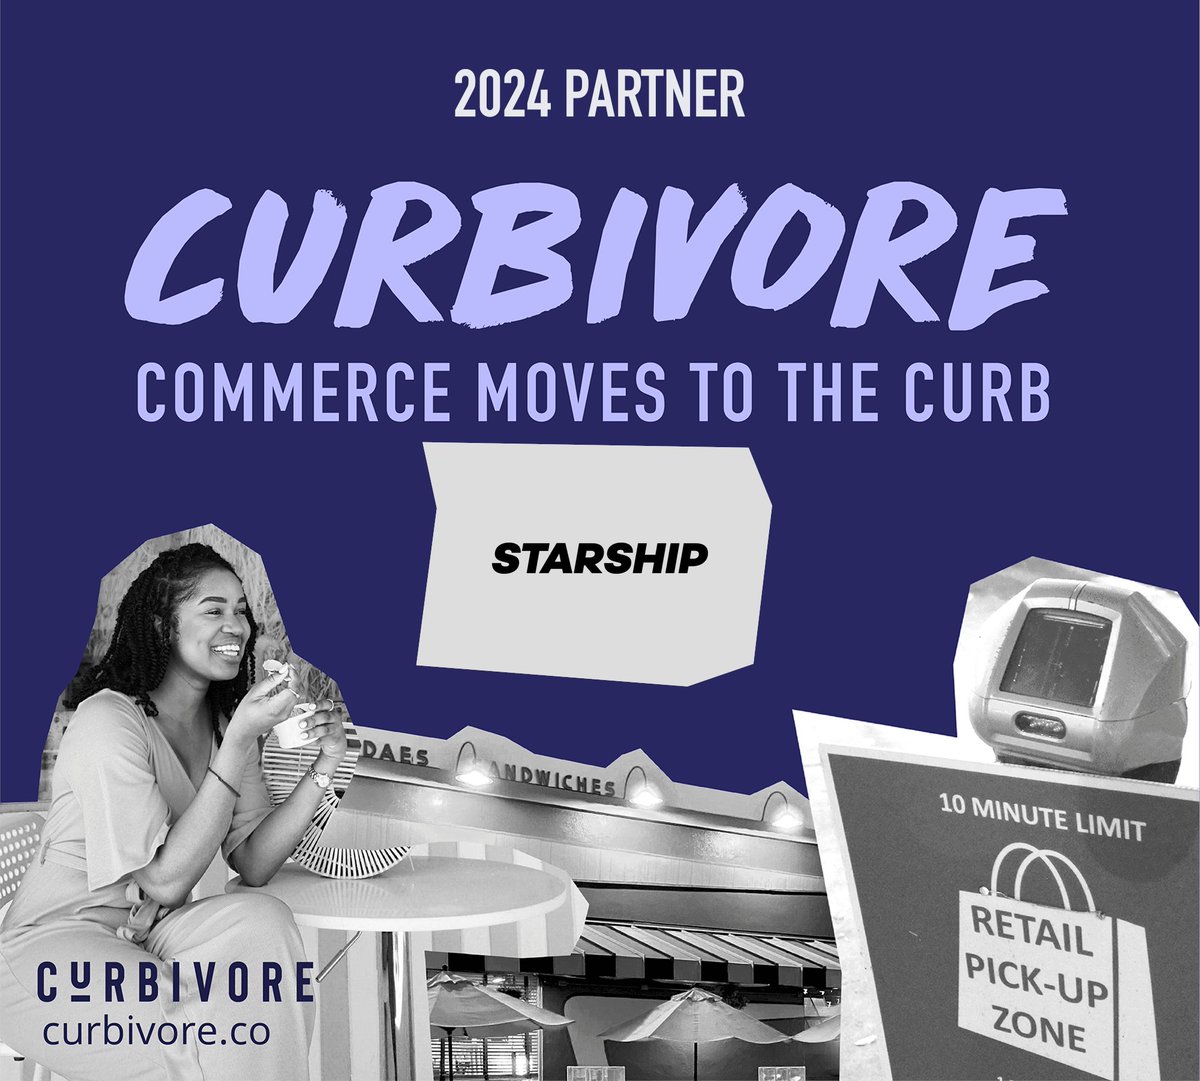 We're thrilled to share Starship robots will be rolling around @CurbivoreNews 2024! Catch us on the 'Fleet of the Future' panel, meet a robot up close, and see why Starship is changing the game. Our bots are excited to meet you! 🤖🏙️ 🗓️ March 29 📍 LA 🔗 curbivore.co/registration